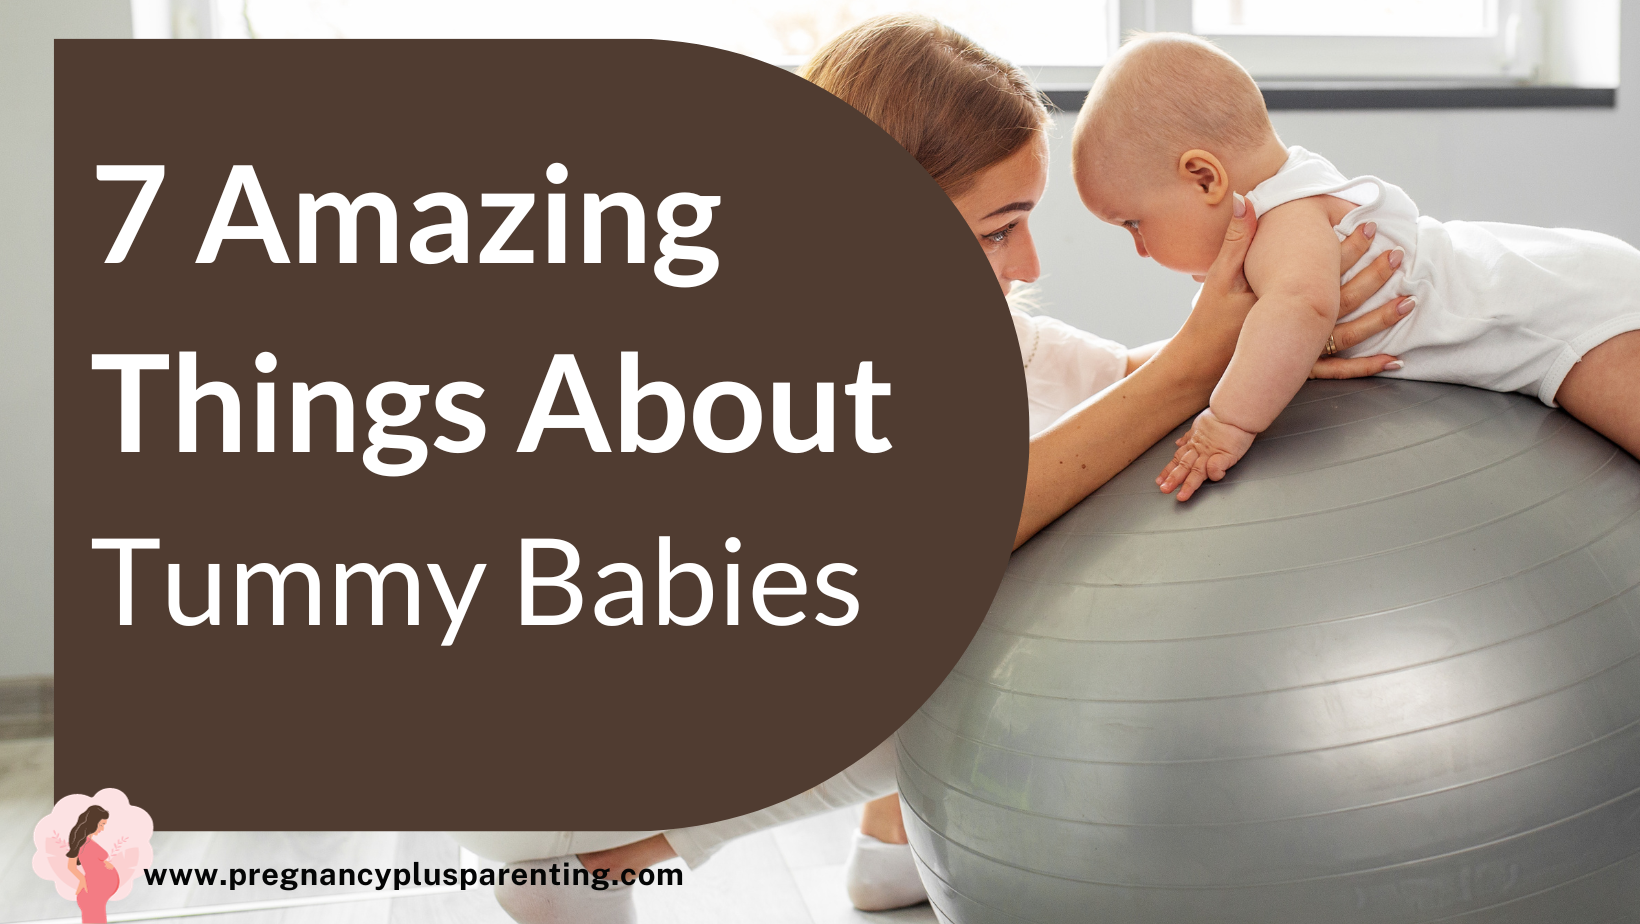 7 Amazing Things About Tummy Babies